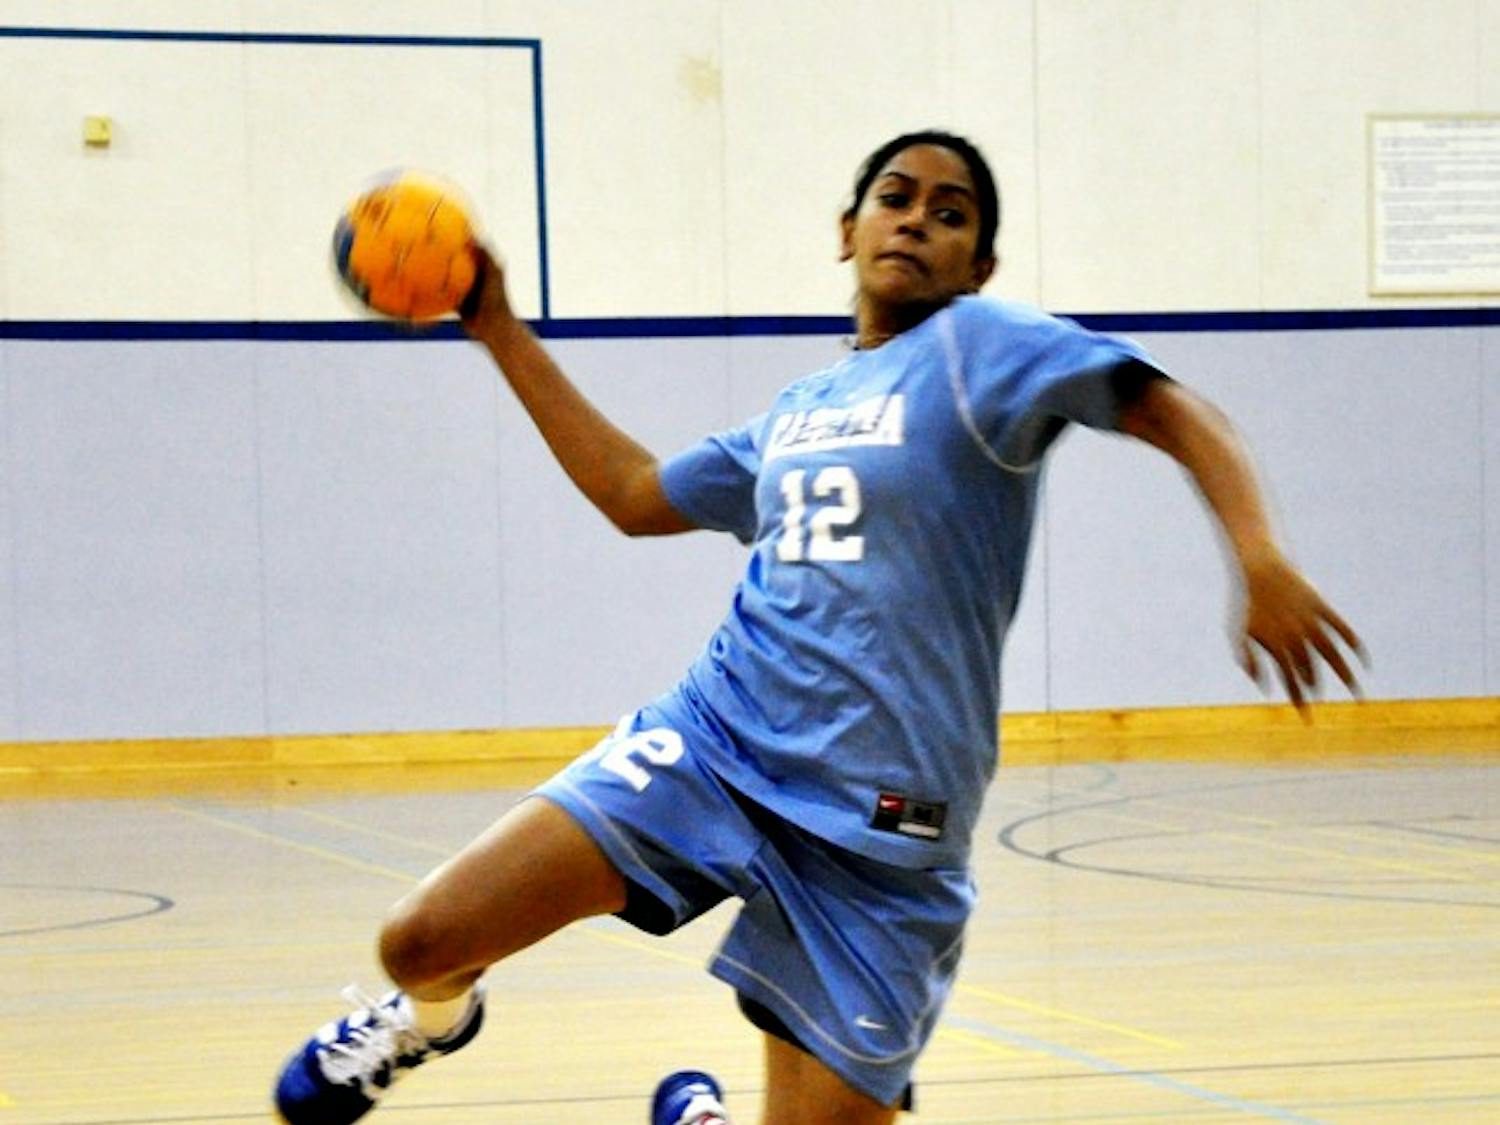 UNC Senior Diva Desai was selected to play for the U-21 national team. She also was selected for the USA Women